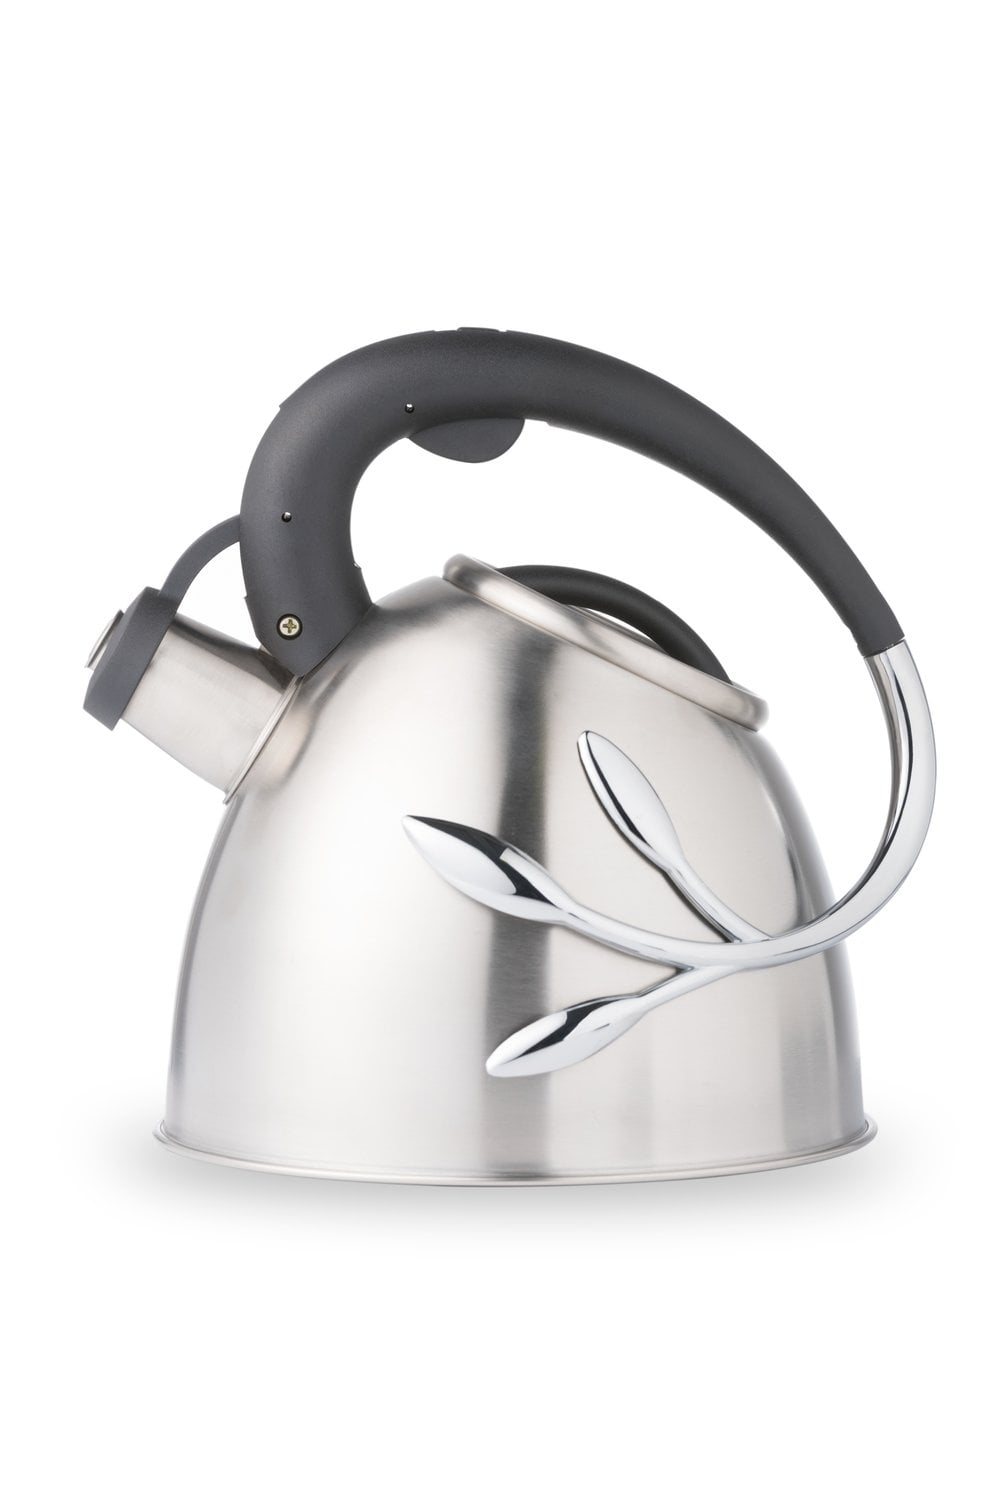 I Use This  Best-Selling Electric Tea Kettle Every Morning